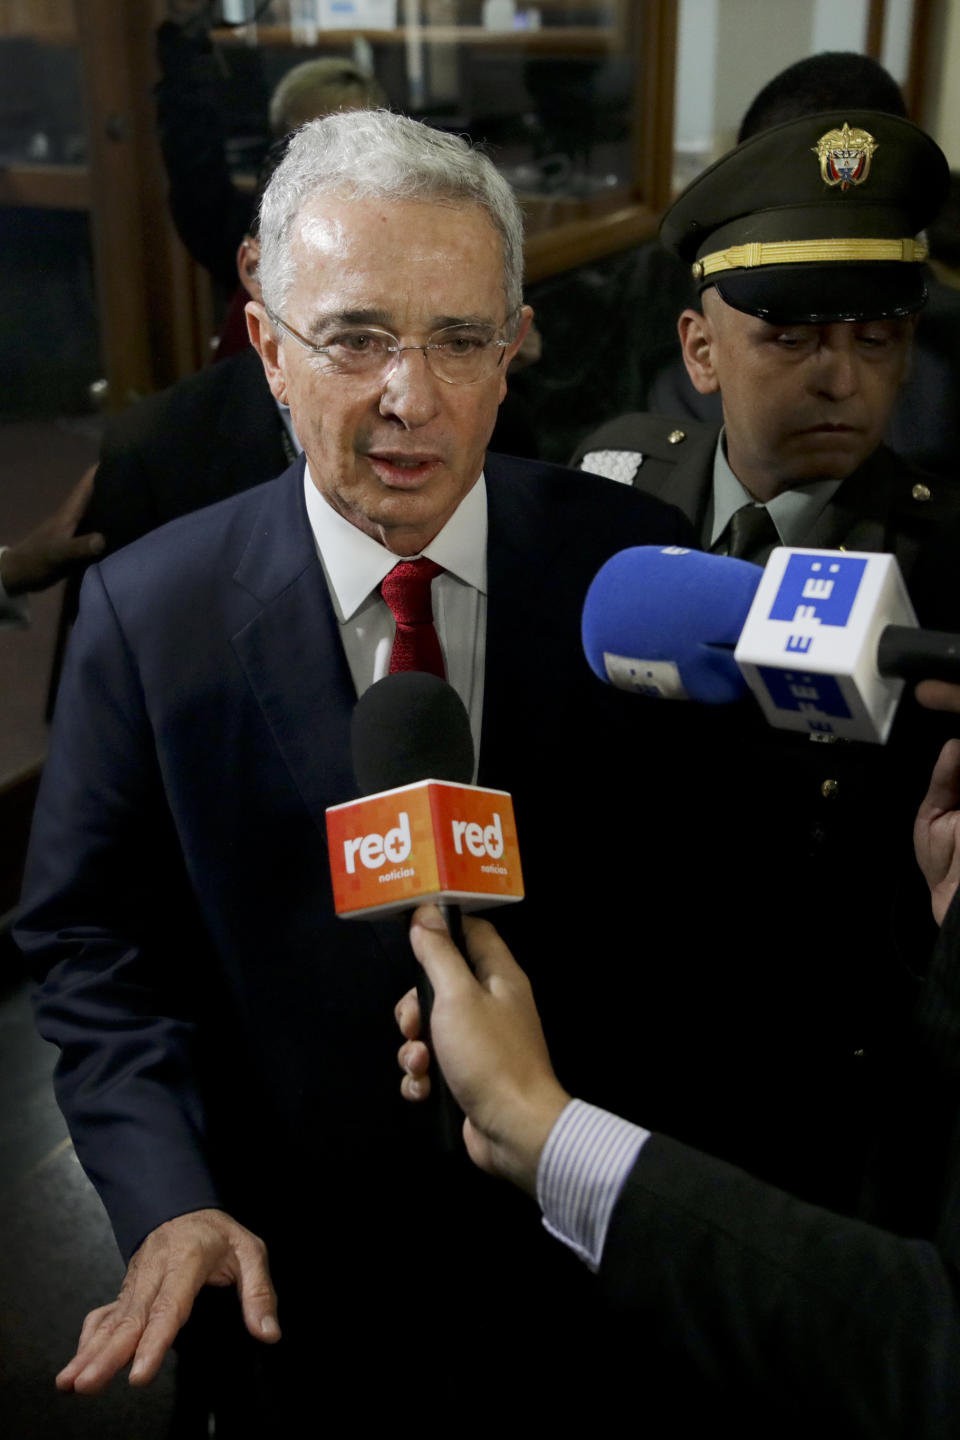 Senator and former president Alvaro Uribe arrives to the Supreme Court for questioning in an investigation for witness tampering charges in Bogota, Colombia, Tuesday, Oct. 8, 2019. Uribe is under investigation over allegations he made false accusations and tried to influence members of a former paramilitary group in a case he started by making similar accusations against leftist Senator Ivan Cepeda. (AP Photo/Ivan Valencia)